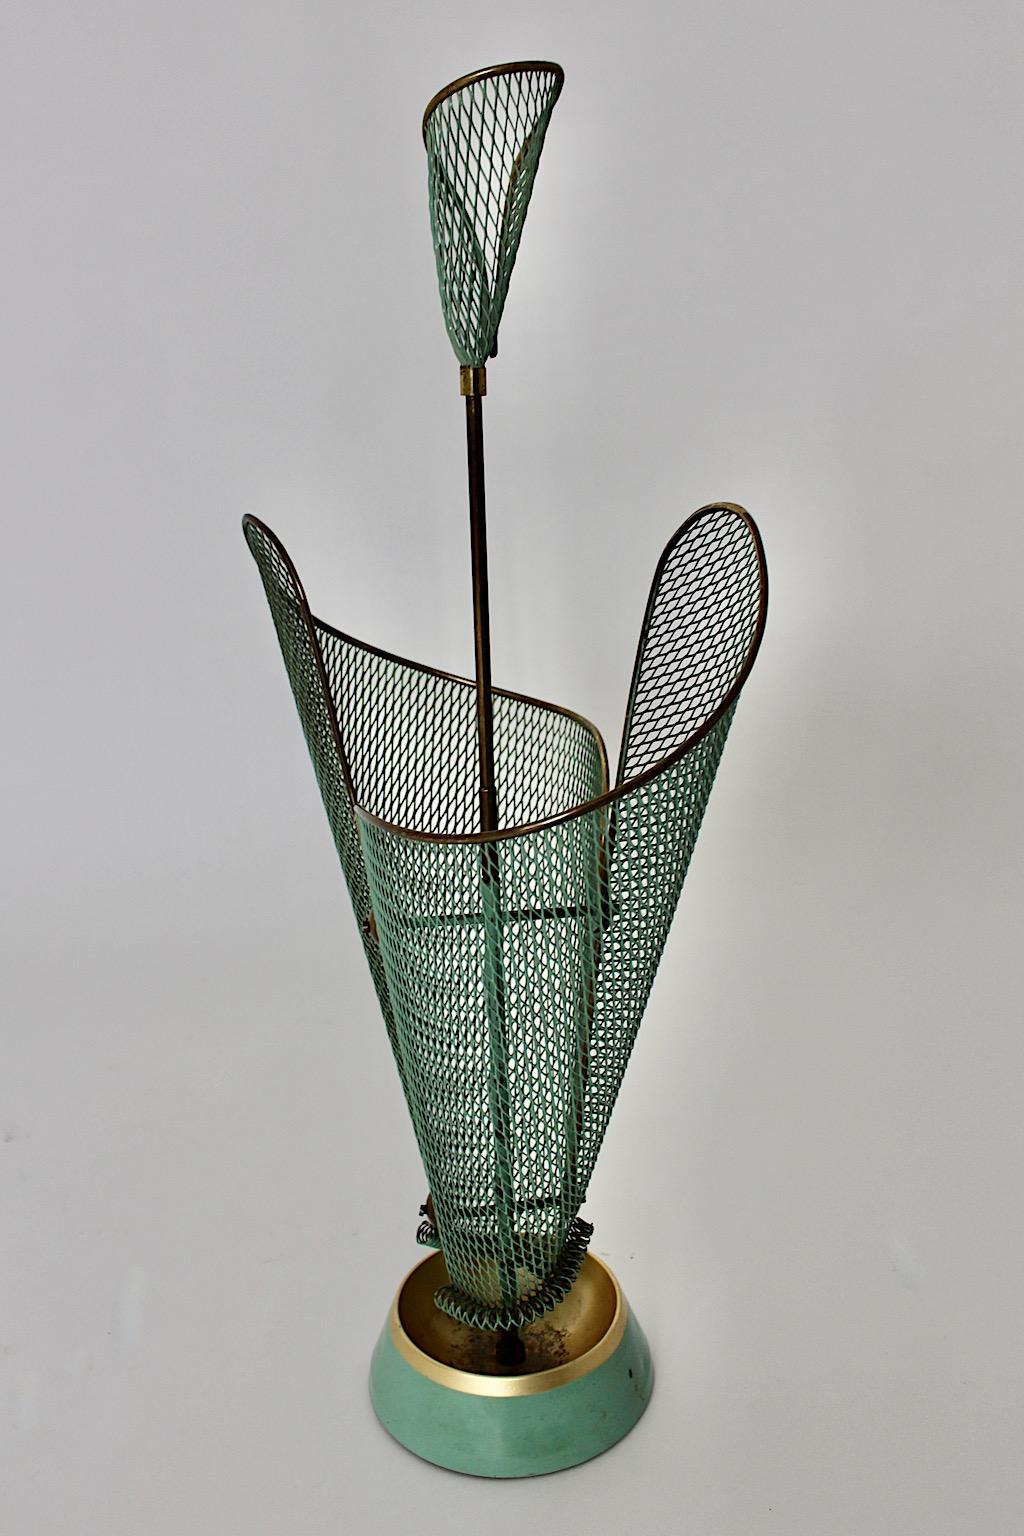 Mid-Century Modern vintage umbrella Stand from mesh metal in pastel green color tone by Schiwa Luxus 1950s Germany.
A stunning umbrella Stand from metal mesh in pastel green and brass details with a cast iron base and an integrated drip cup.
The